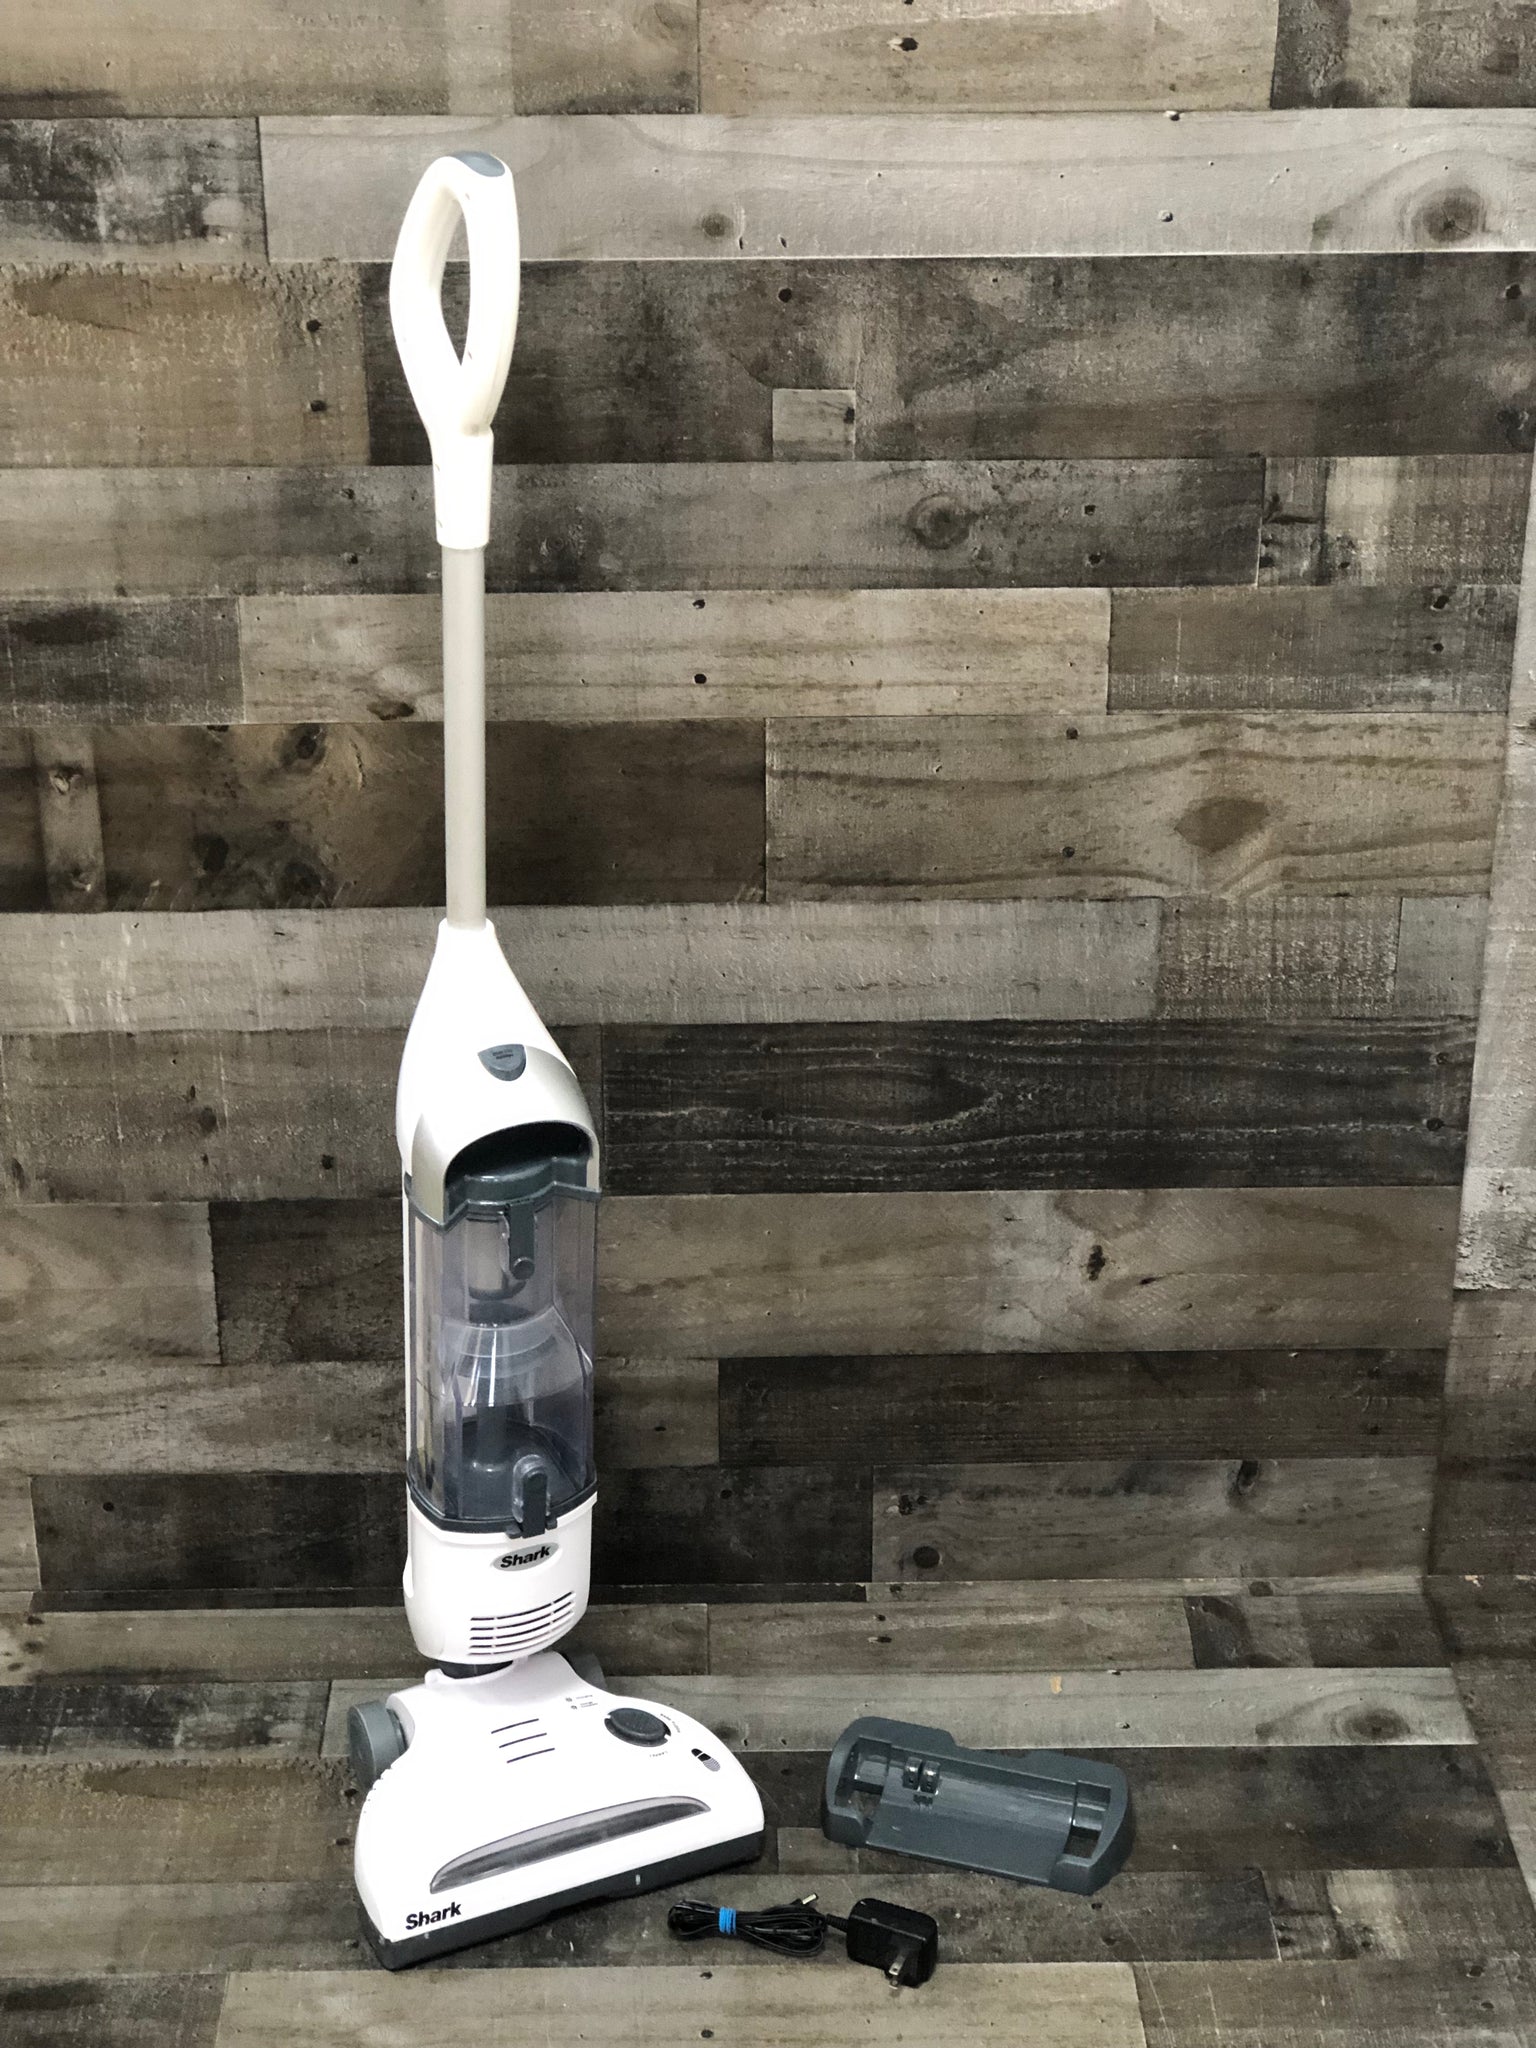 Shark SV1106 Navigator Freestyle Upright Bagless Cordless Stick Vacuum for Carpet, Hard Floor and Pet with XL Dust Cup and 2-Speed Brushroll, White/Grey